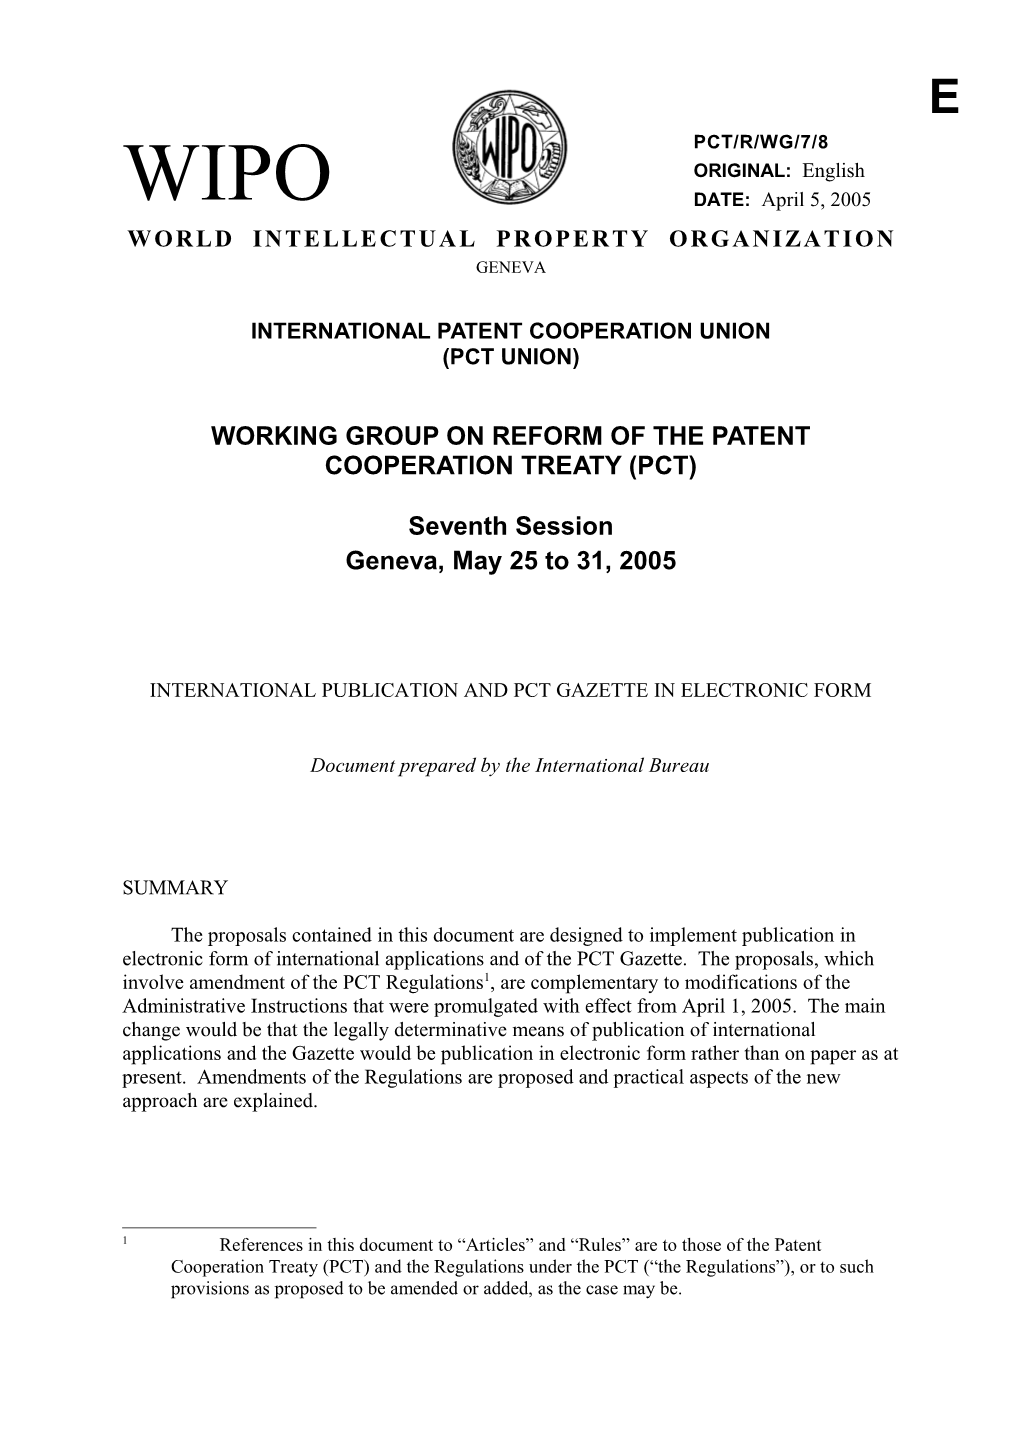 PCT/R/WG/7/8: International Publication and PCT Gazette in Electronic Form